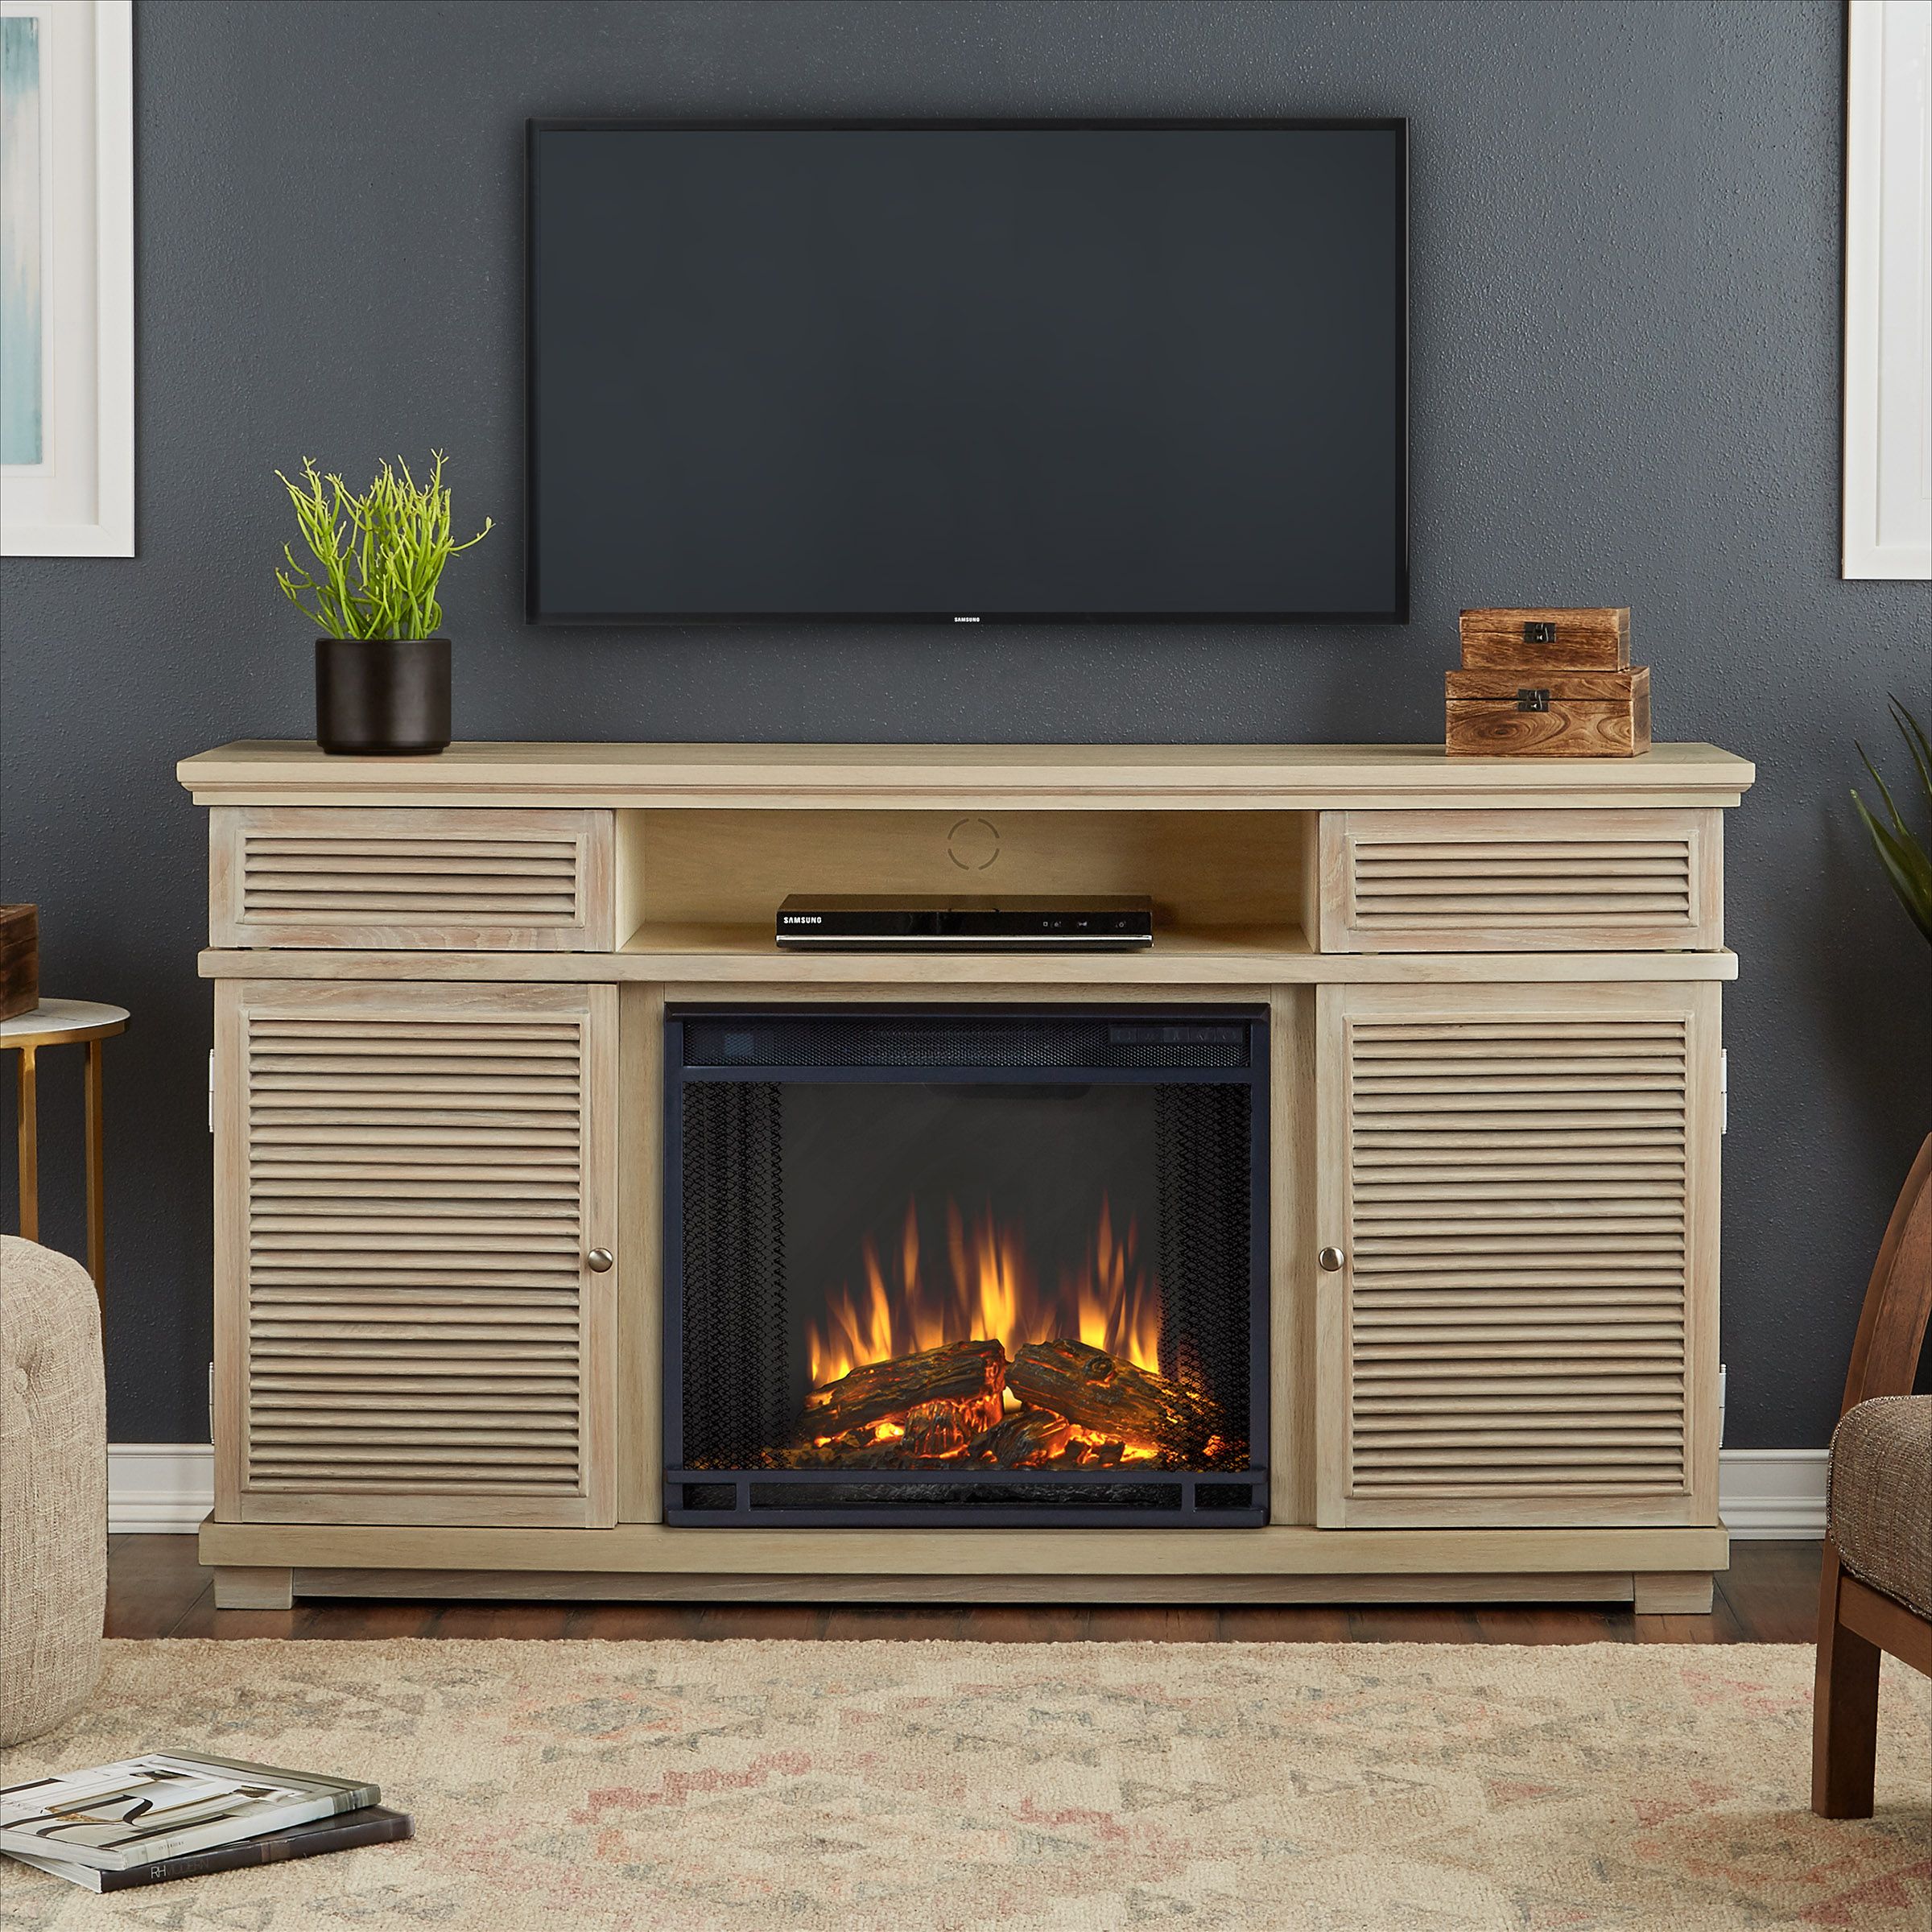 58" Cavallo Entertainment Center Electric Fireplace With Regard To 50 Inch Fireplace Tv Stands (View 11 of 15)